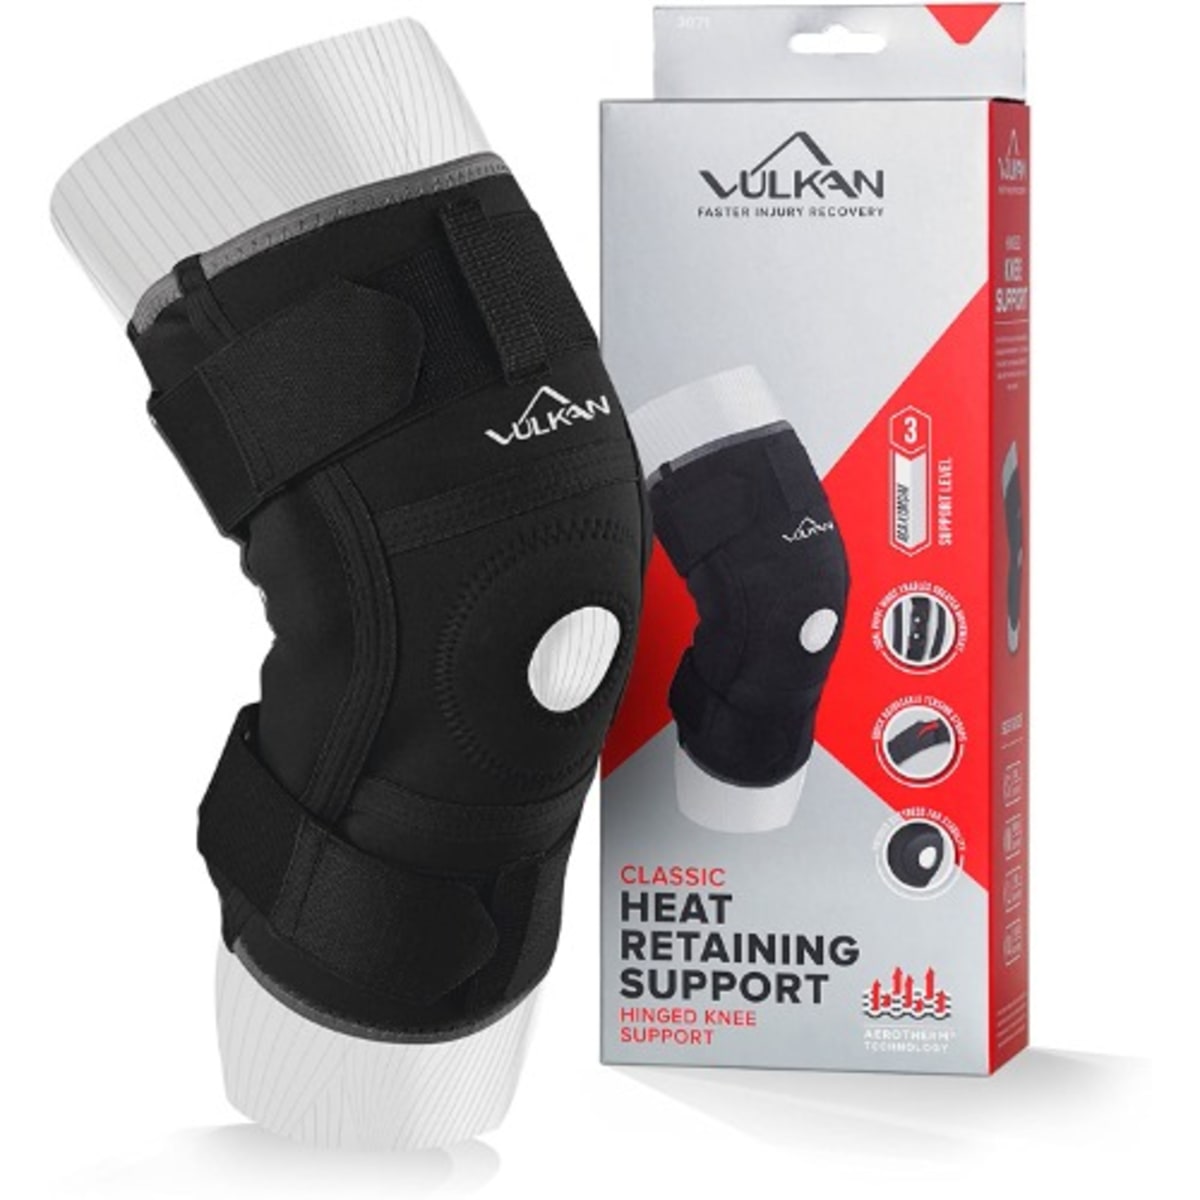 Classic Hinged Knee Support Xl